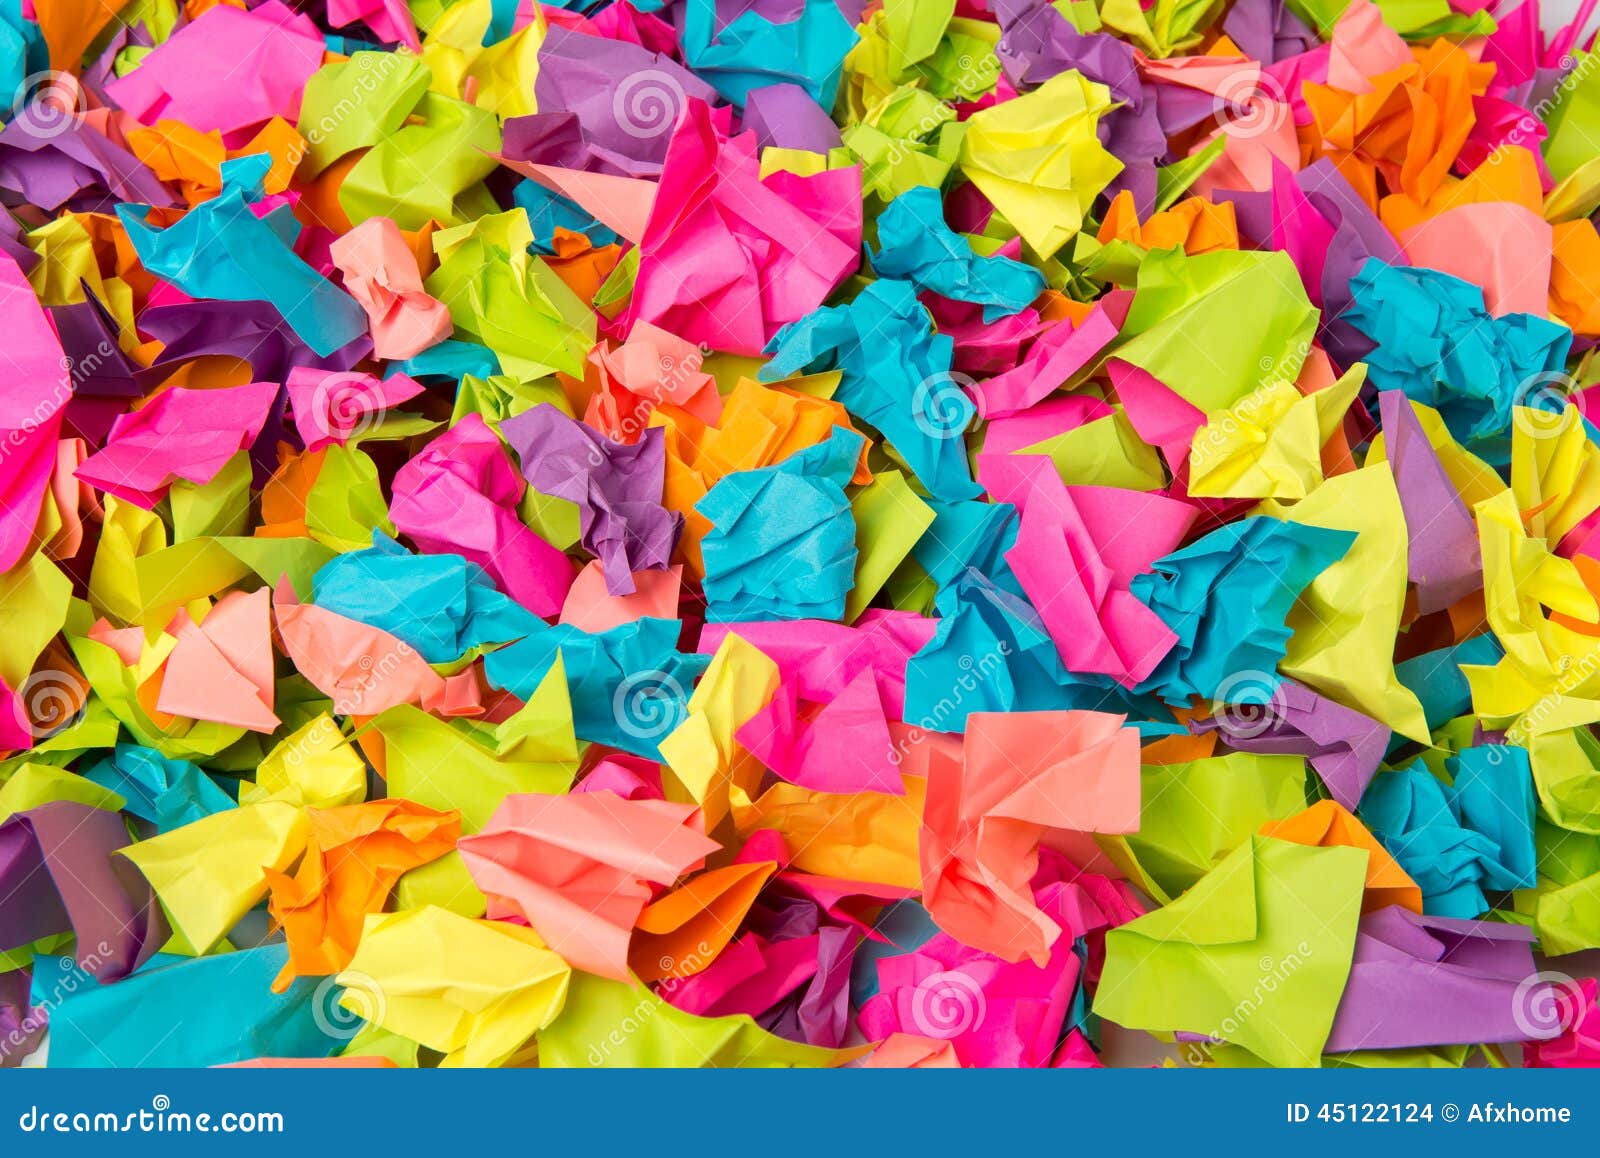 Many Crumpled Colored Paper Background Stock Photo - Image of garbage,  crinkle: 45122124